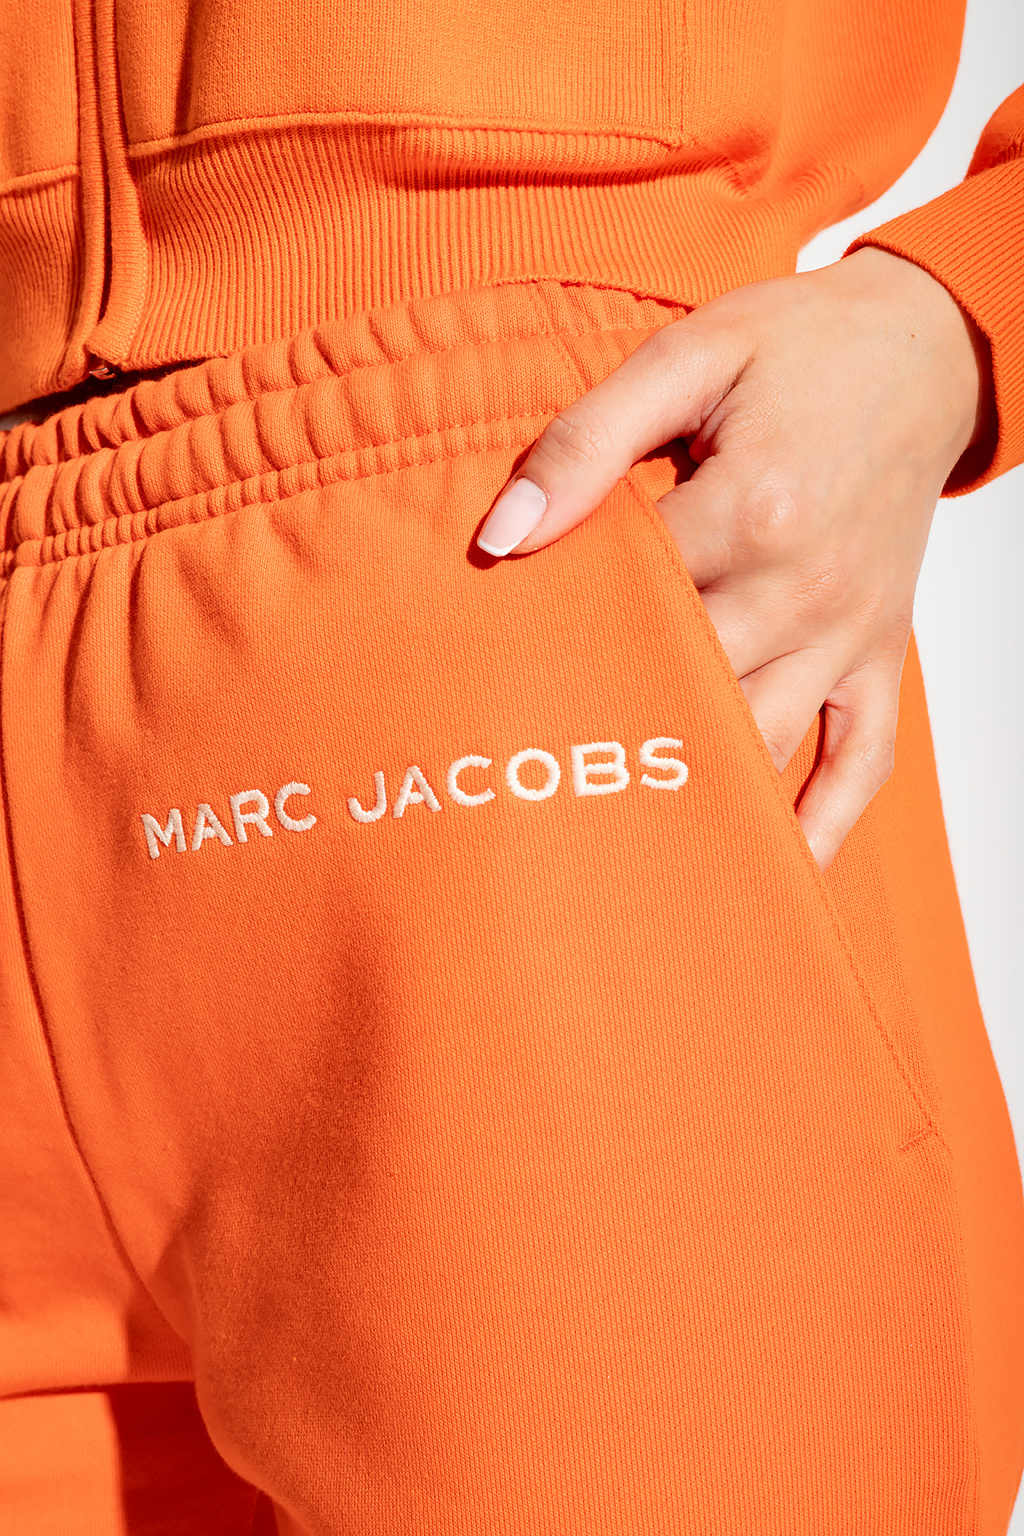 Marc Jacobs In its Resort 2023 collection alongside Marc Jacobs